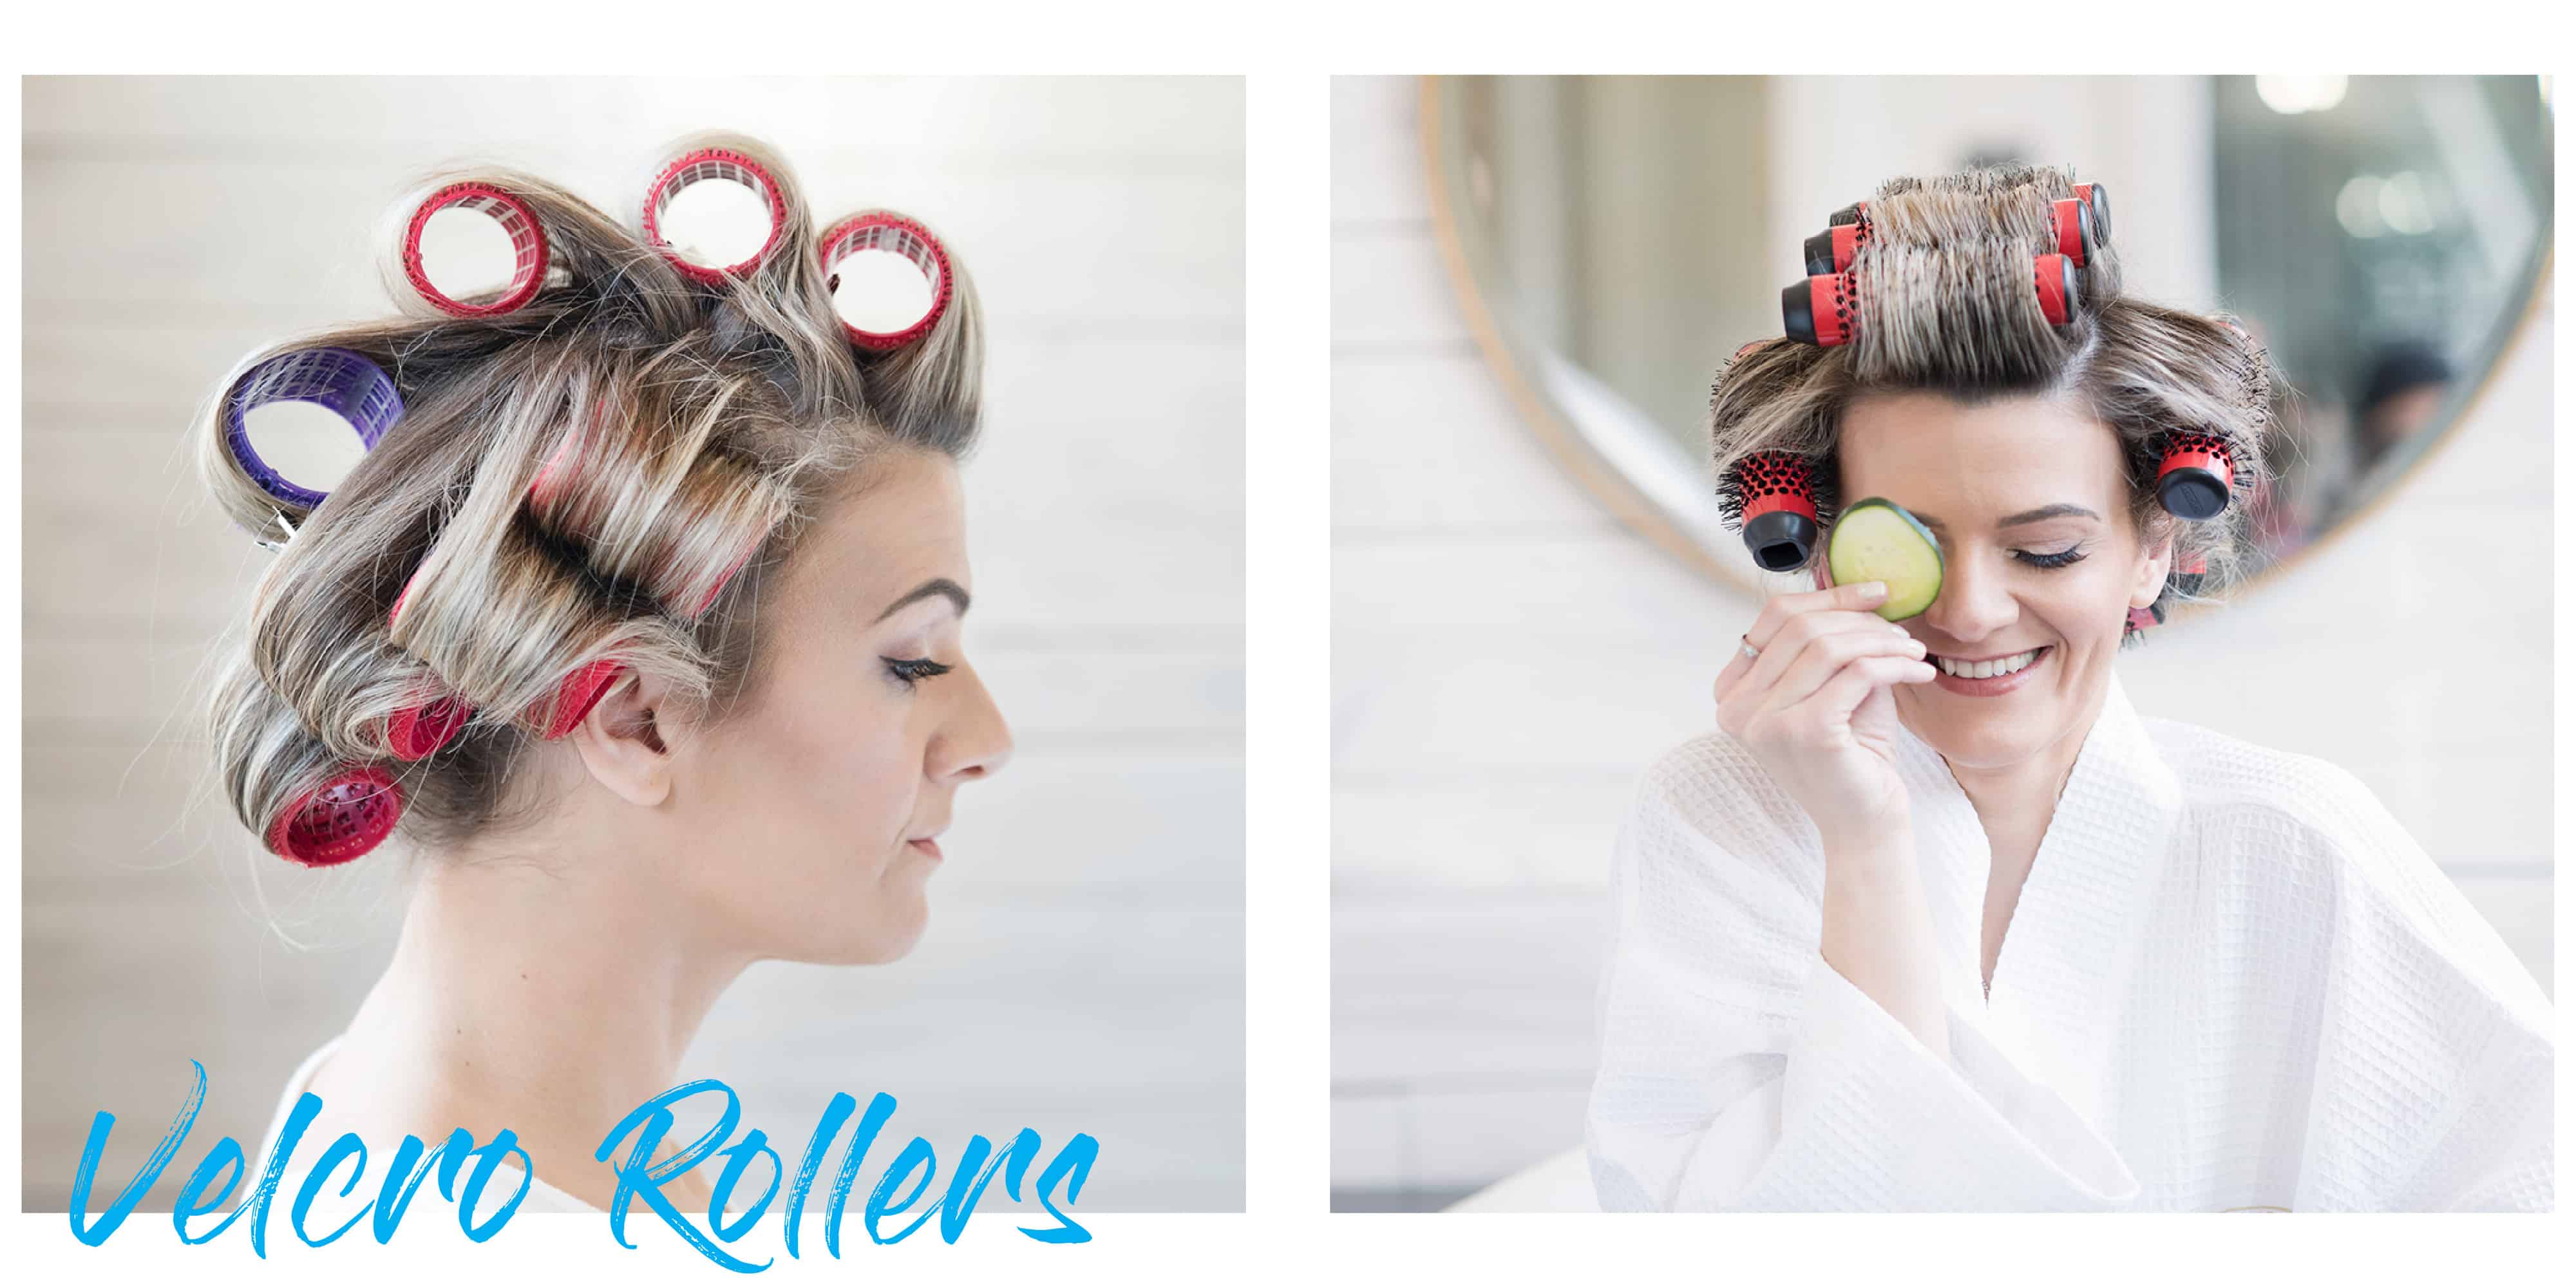 Before and After picture of showing a model using Velcro rollers for a DIY blowout style versus the ease of using the Click n Curl Blowout Brushes with detachable handles.